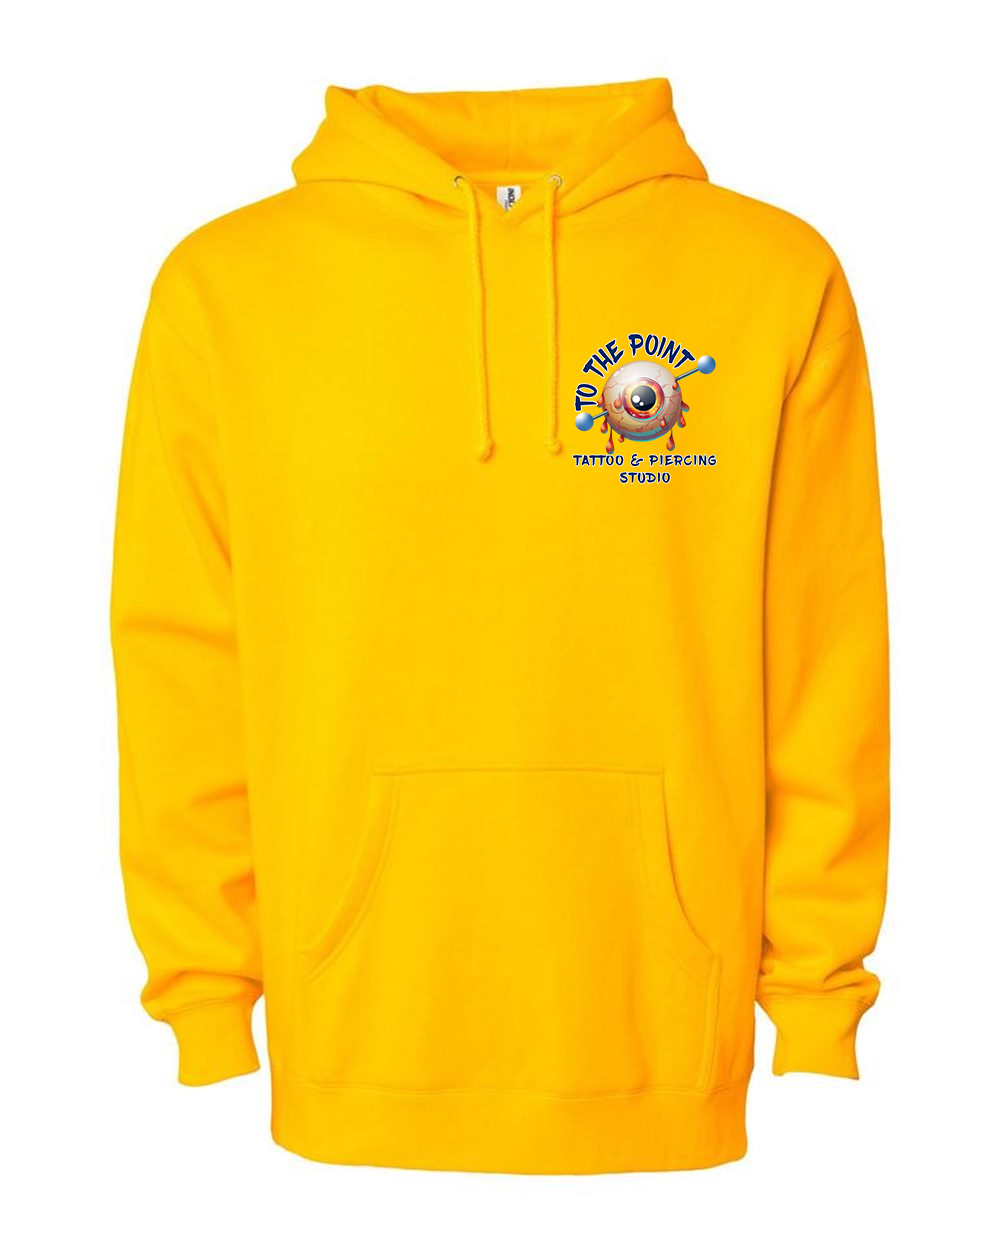 To The Point Piercing Studio Heavyweight Hoodie - Gold